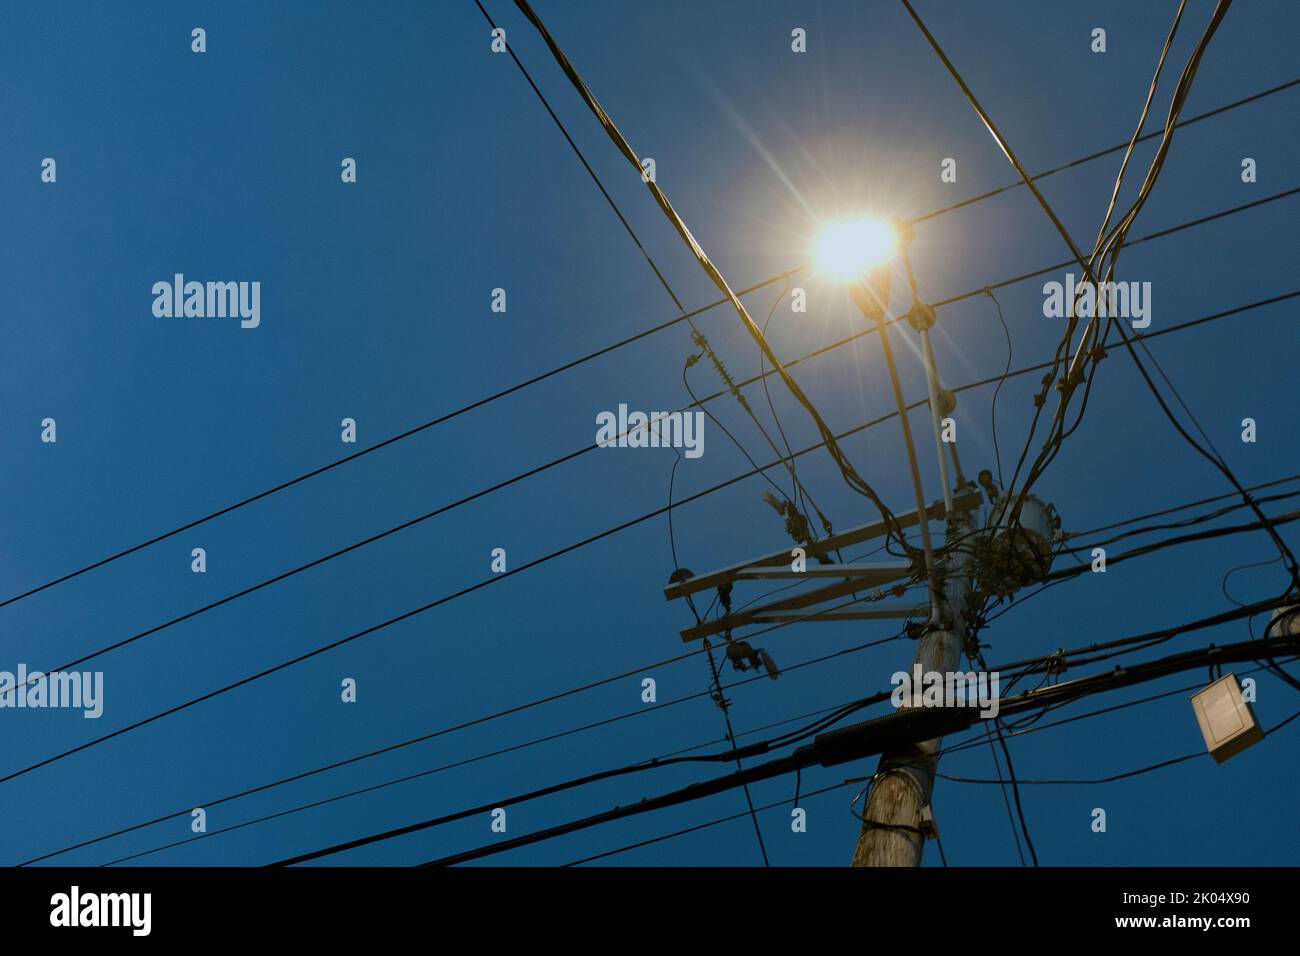 Low Angle View of illuminated Street Light and Utility Wires at Dusk Stock Photo